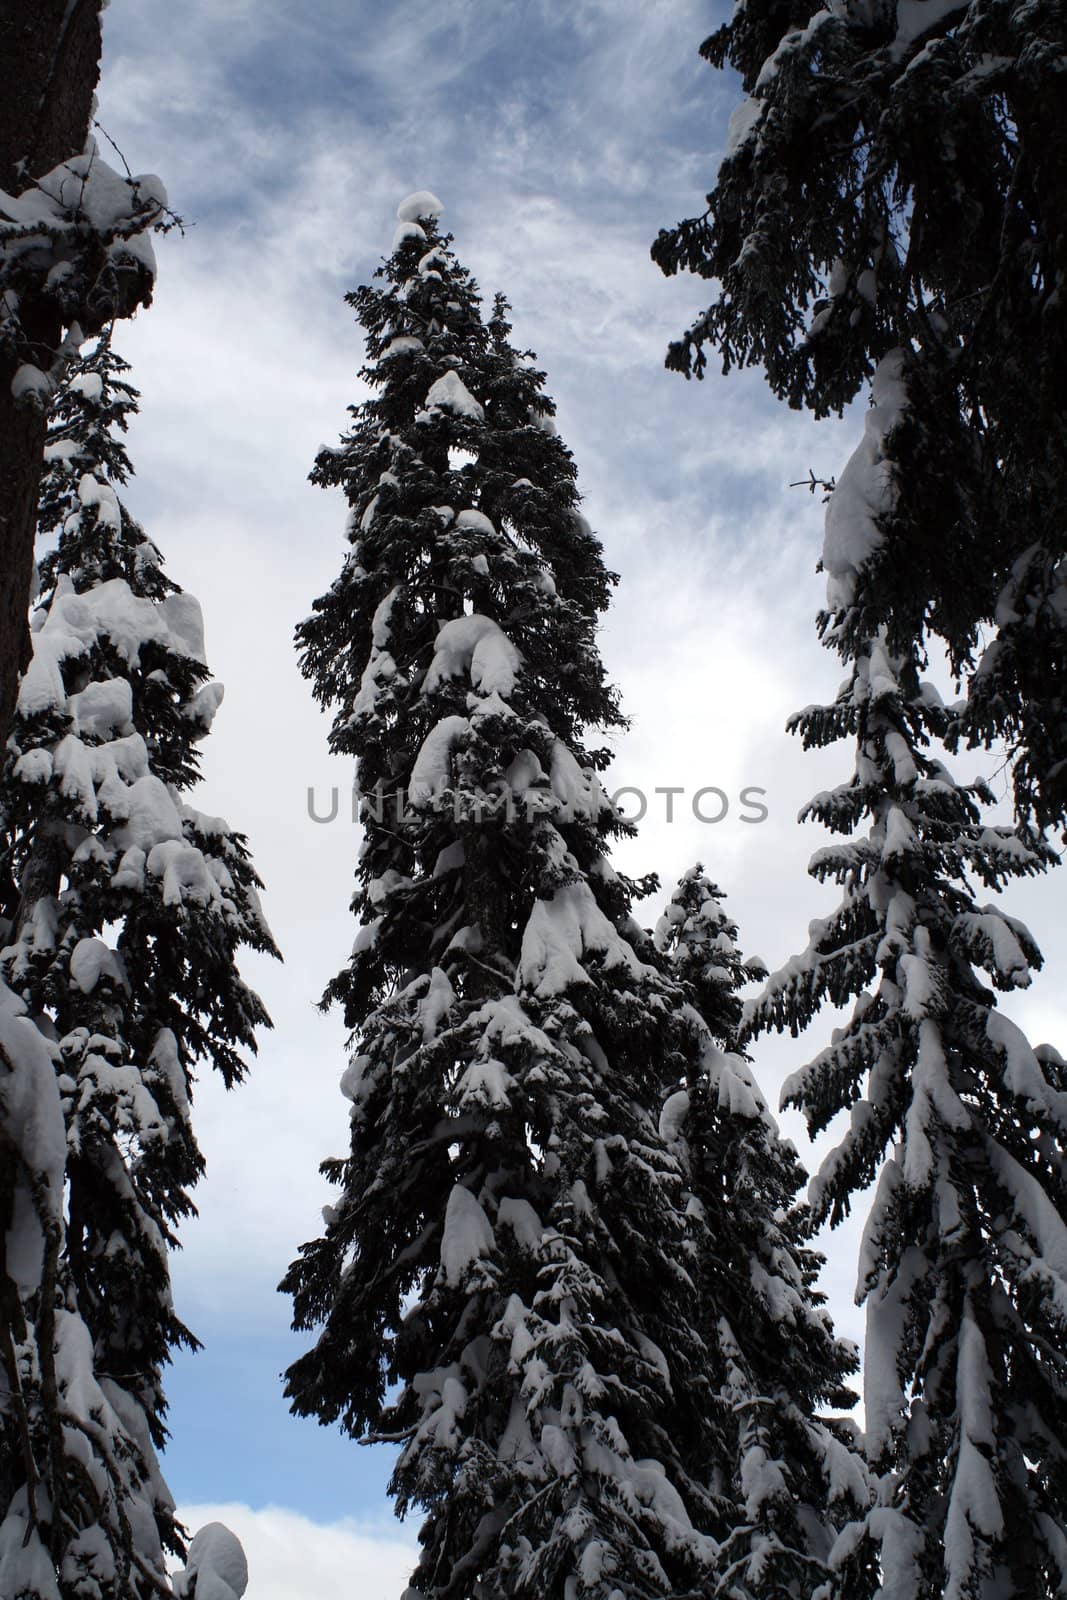 Snow Covered Evergreens by jasony00